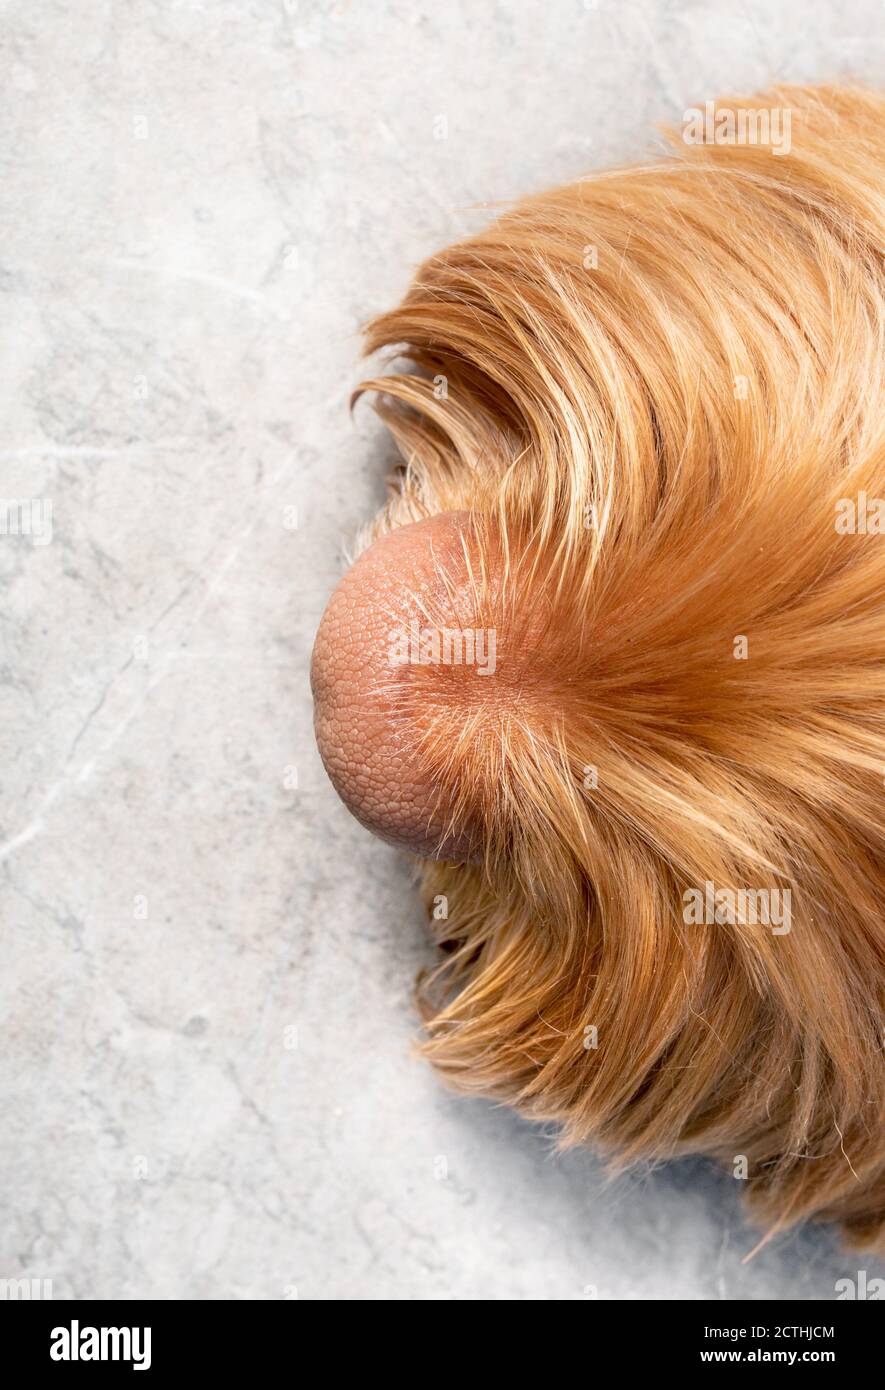 Close up of soft pink dog nose. Top view of Labradoodle dog resting on marble stone. Focus on nose. Concept for superior sense of smell. Stock Photo